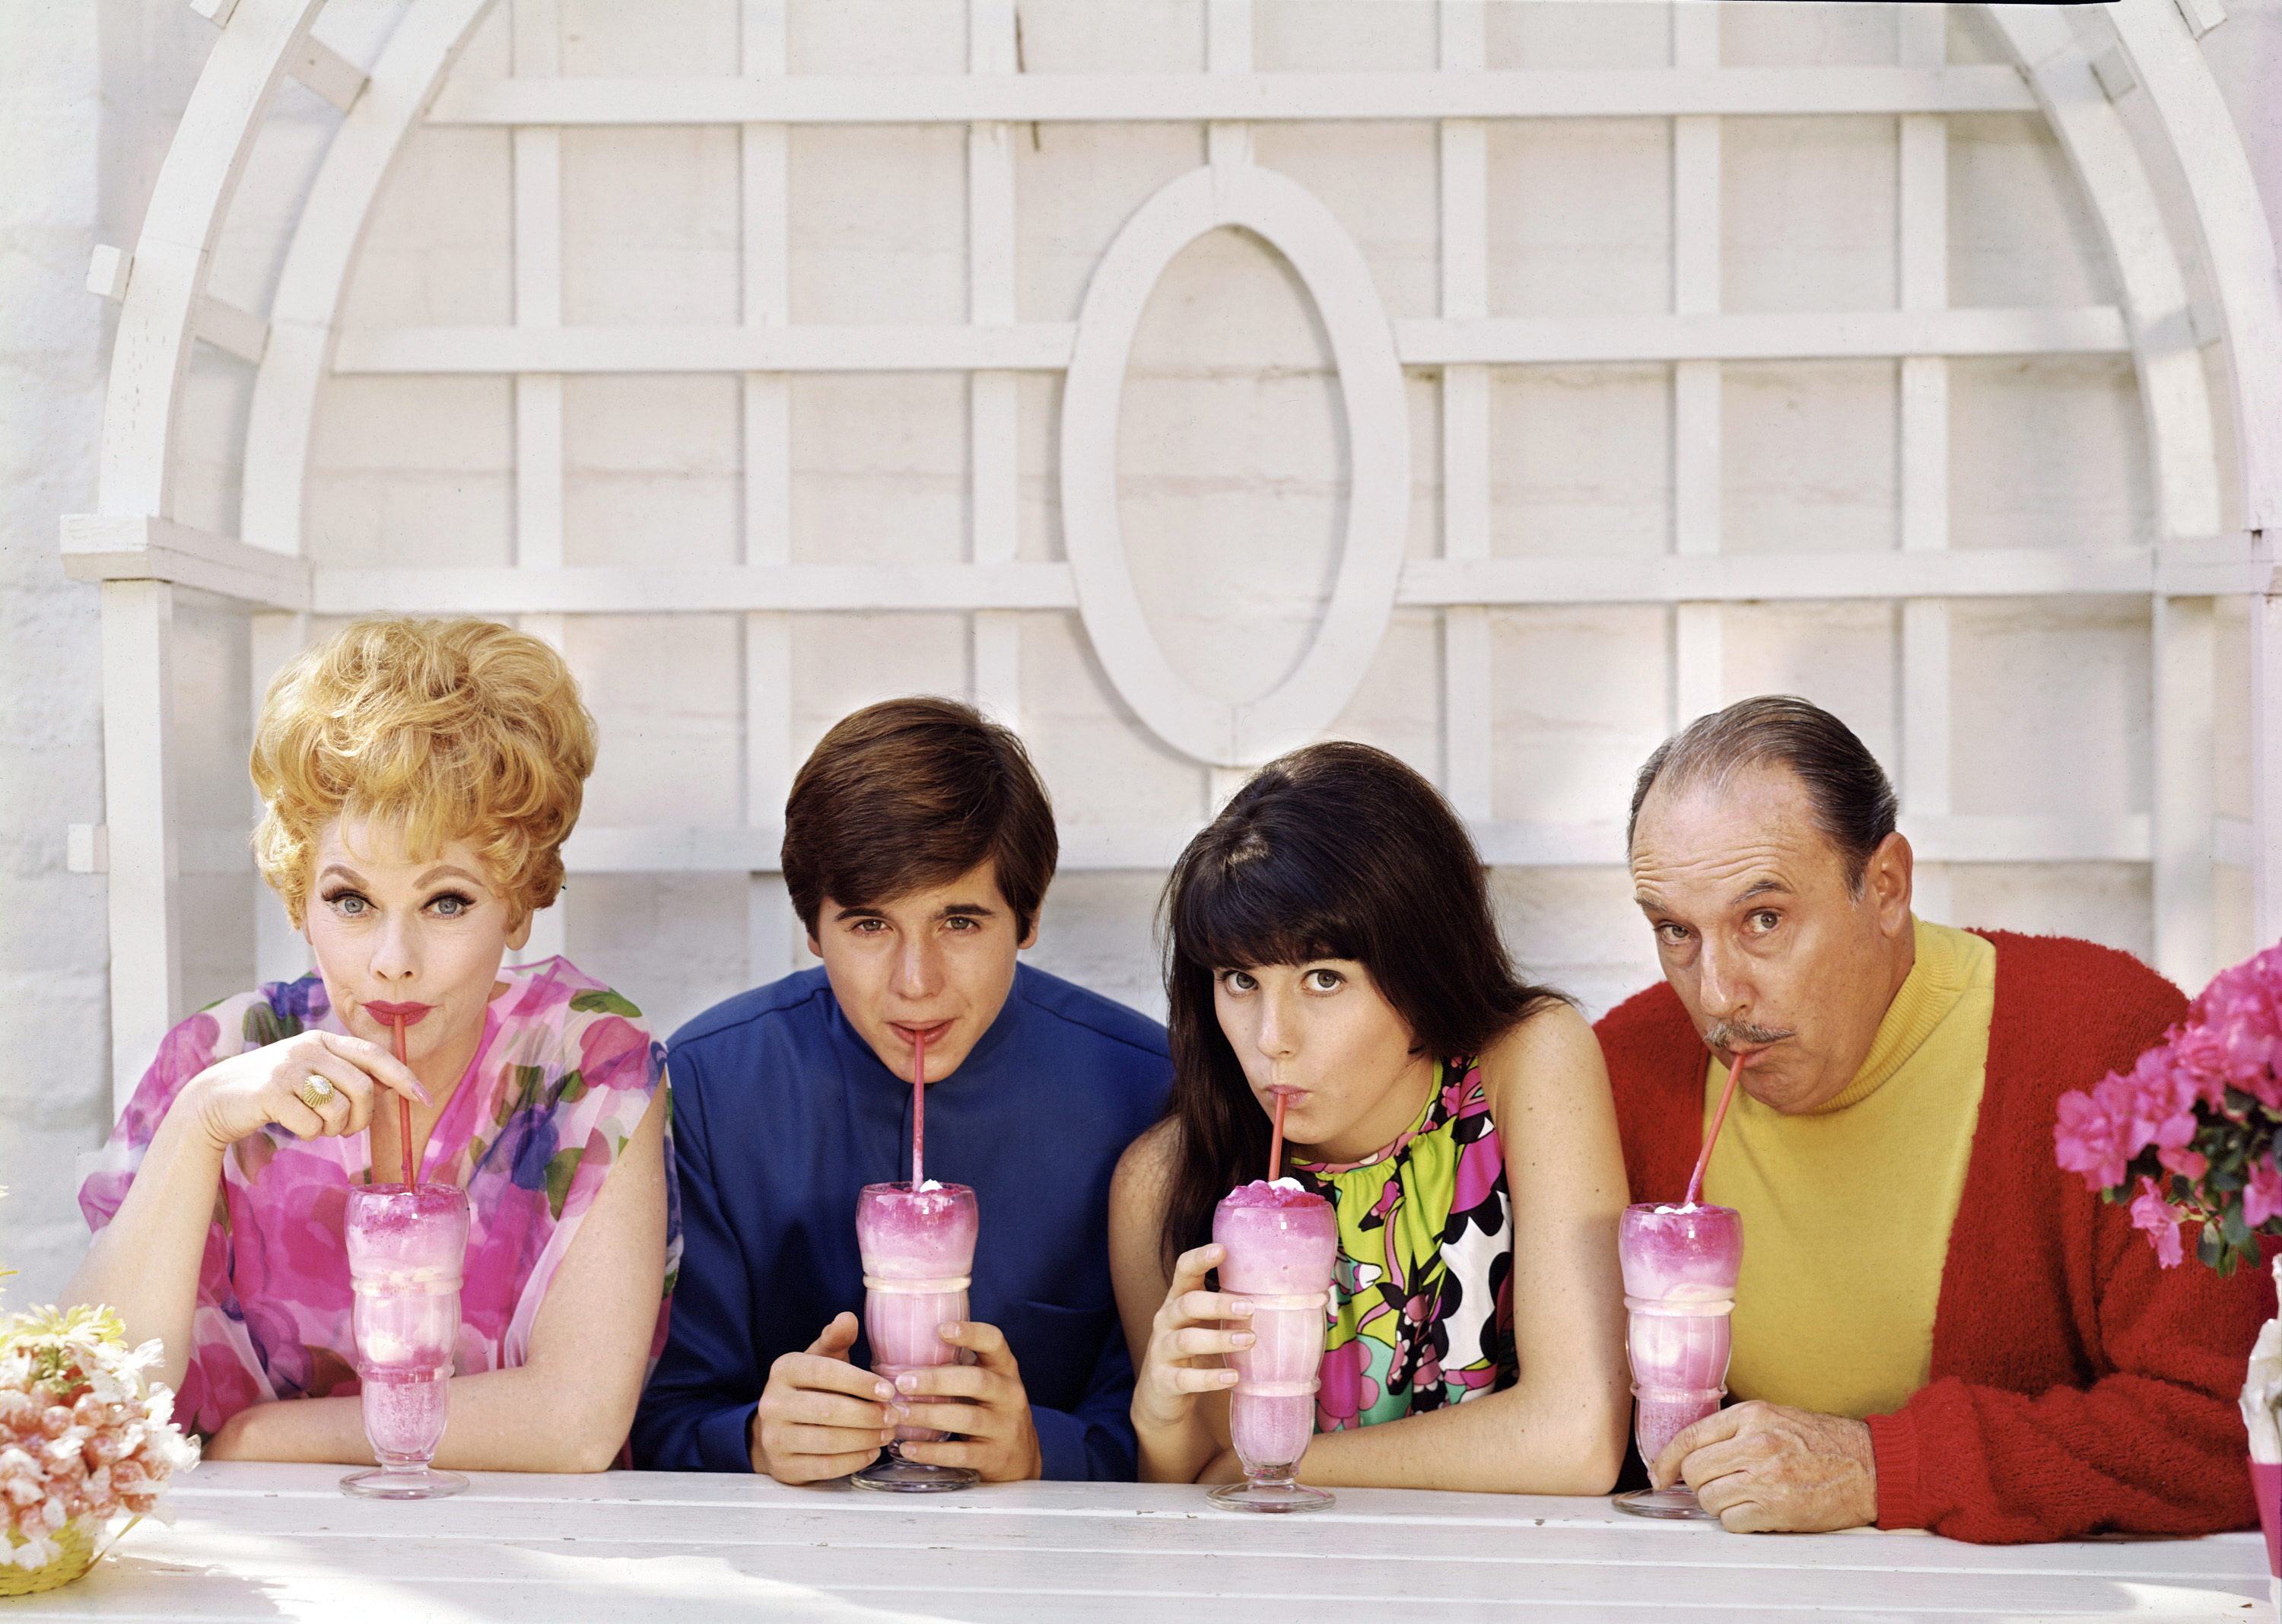 Lucille Ball, Desi Arnaz, Jr., Lucie Arnaz, and Gale Gordon in "Here's Lucy," 1969 | Source: Getty Images